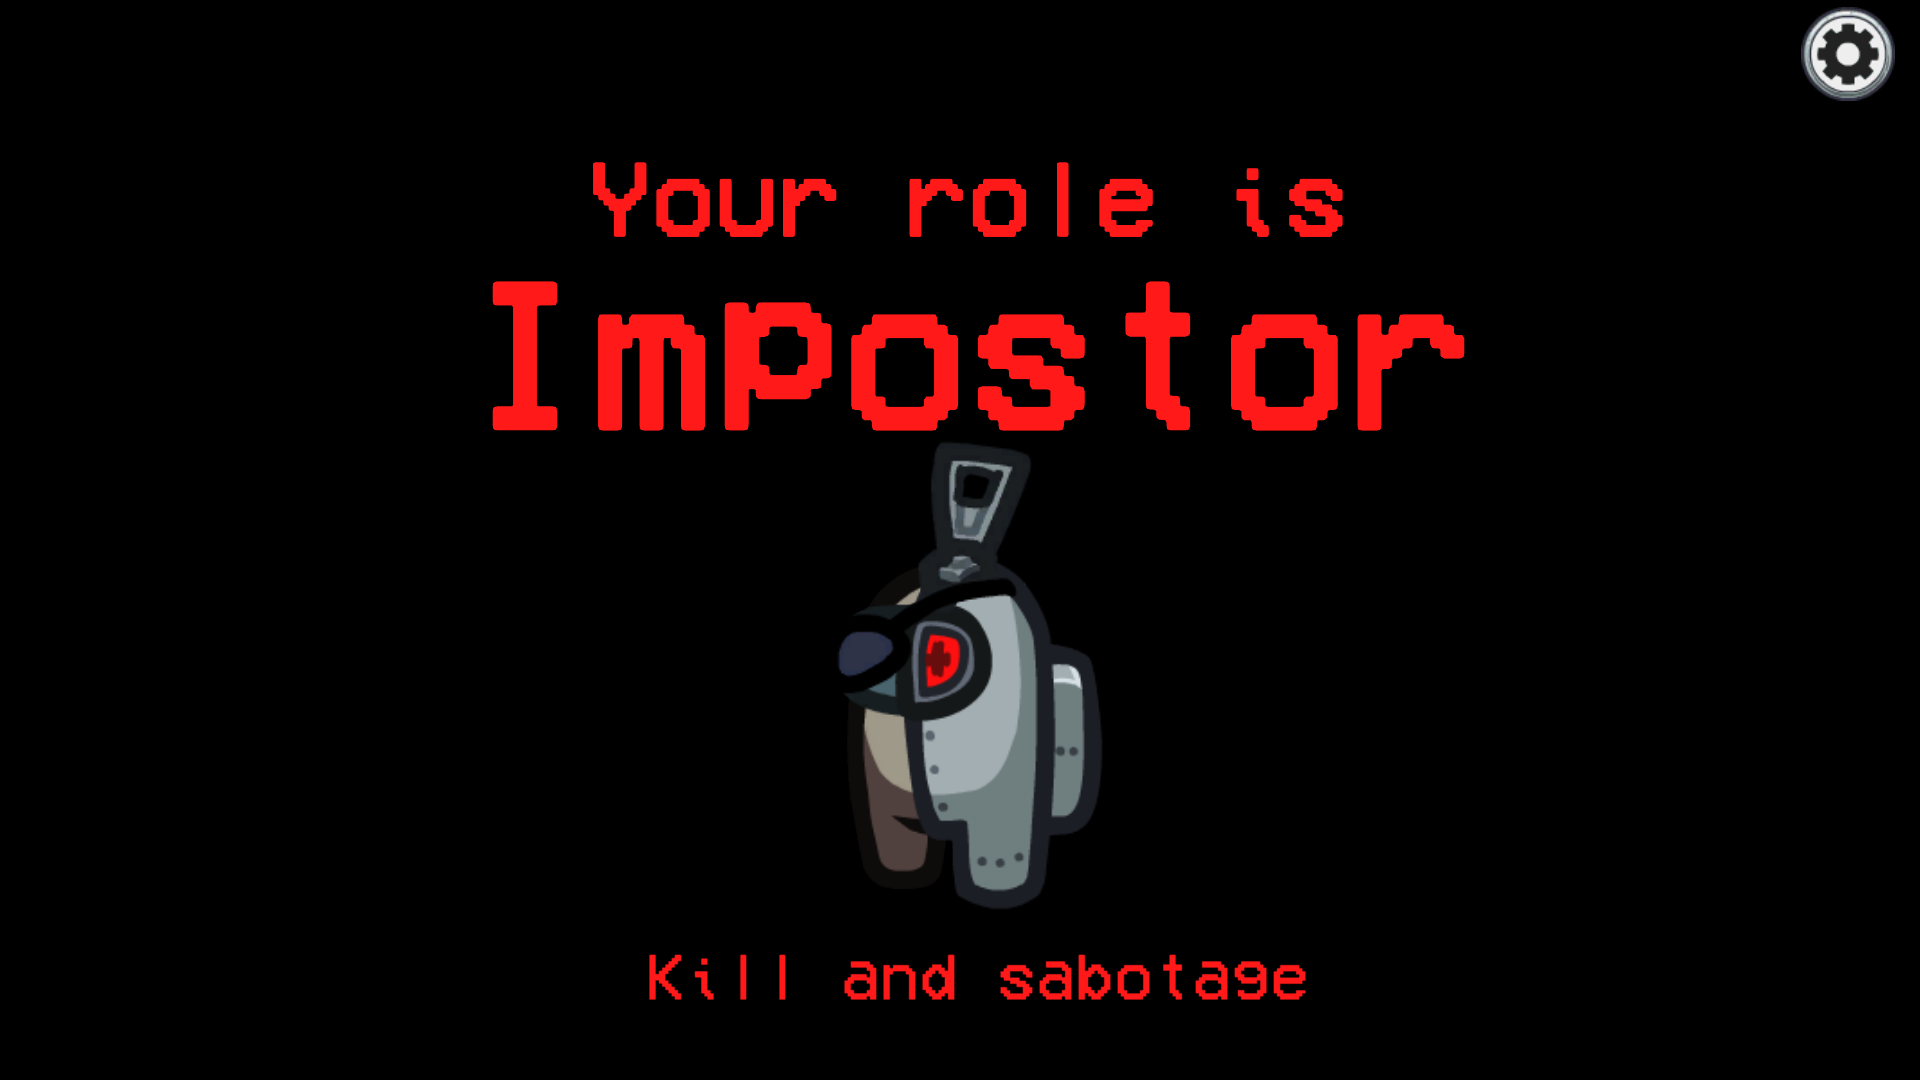 Hey, did you know Innersloth worked on Vs Impostor V4 with Team Impostorm?  : r/AmongUs